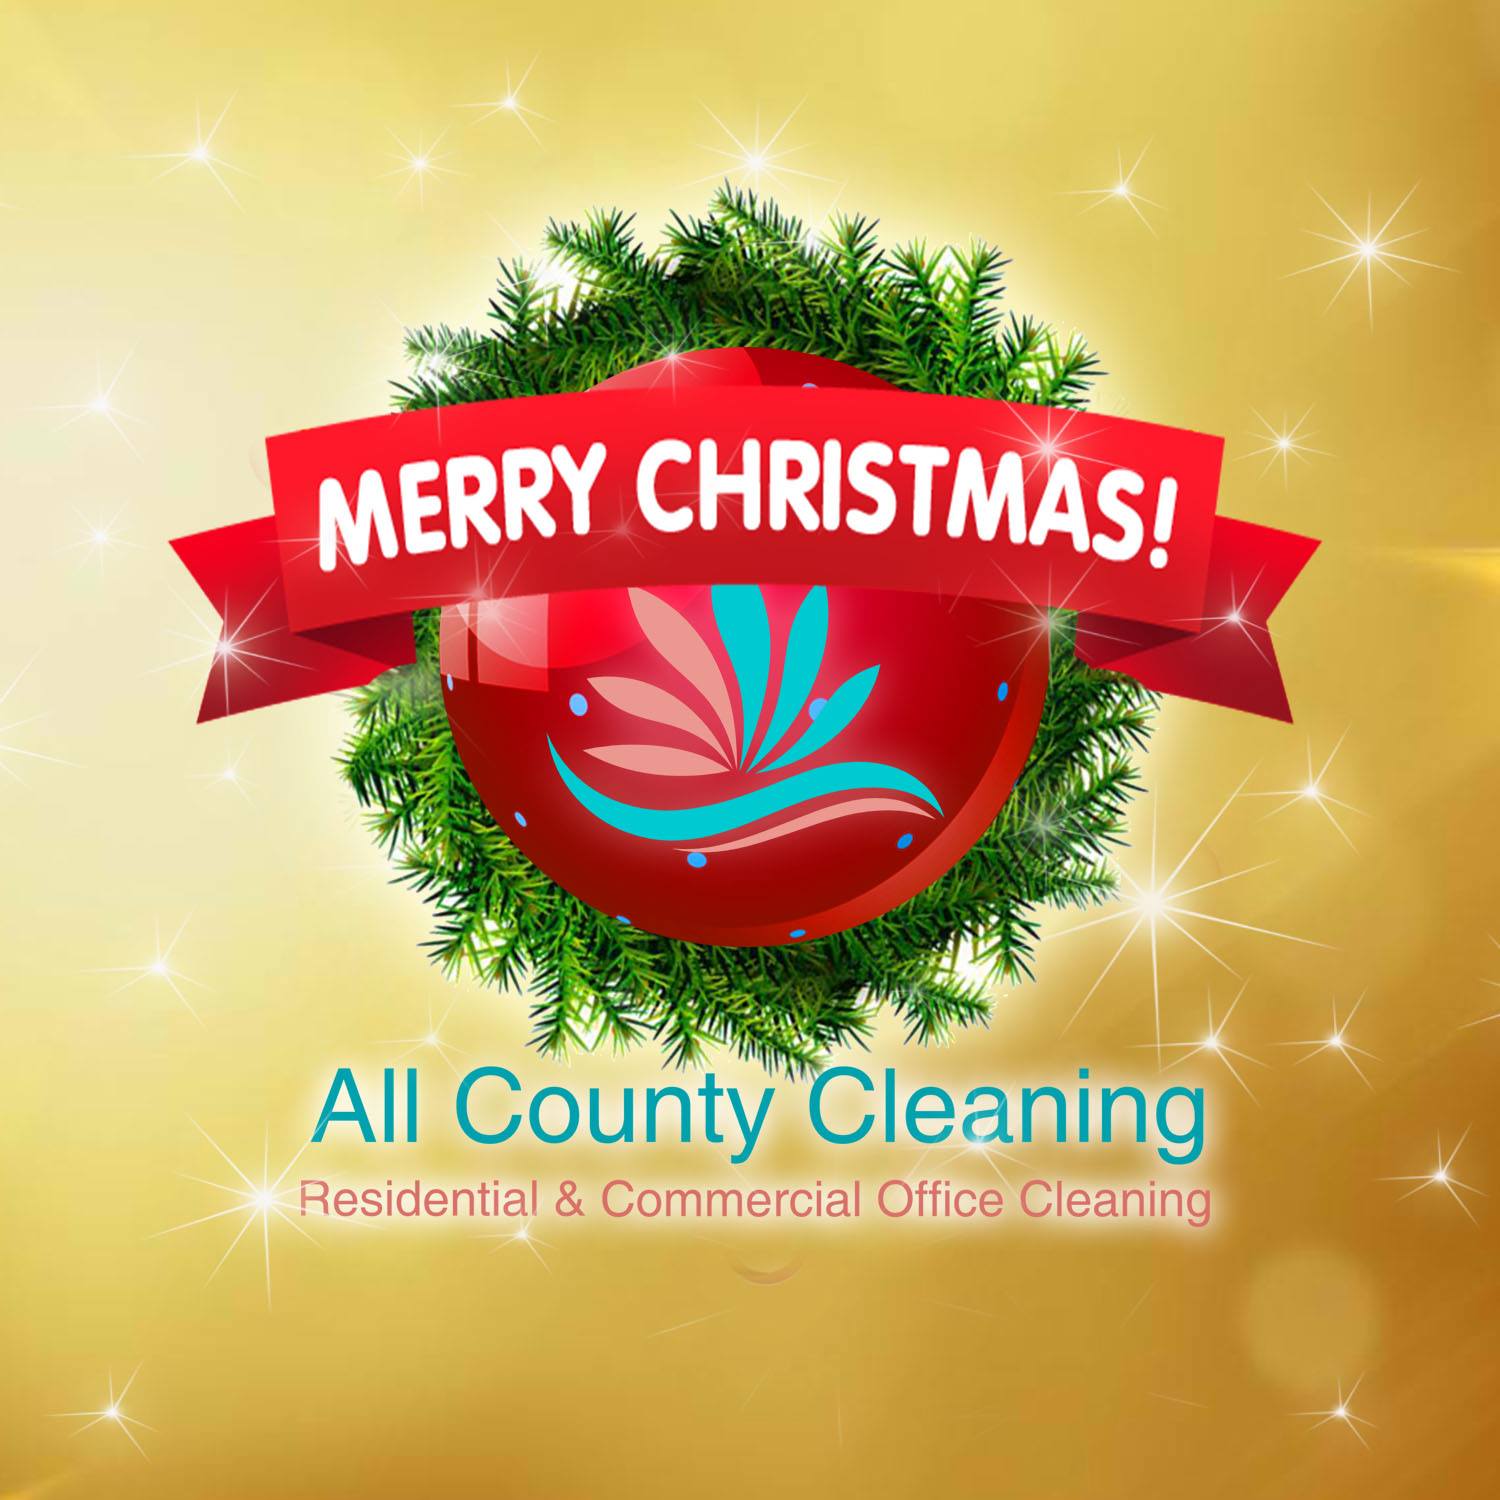 All County Cleaning 104 Lake Dr, Felton Delaware 19943